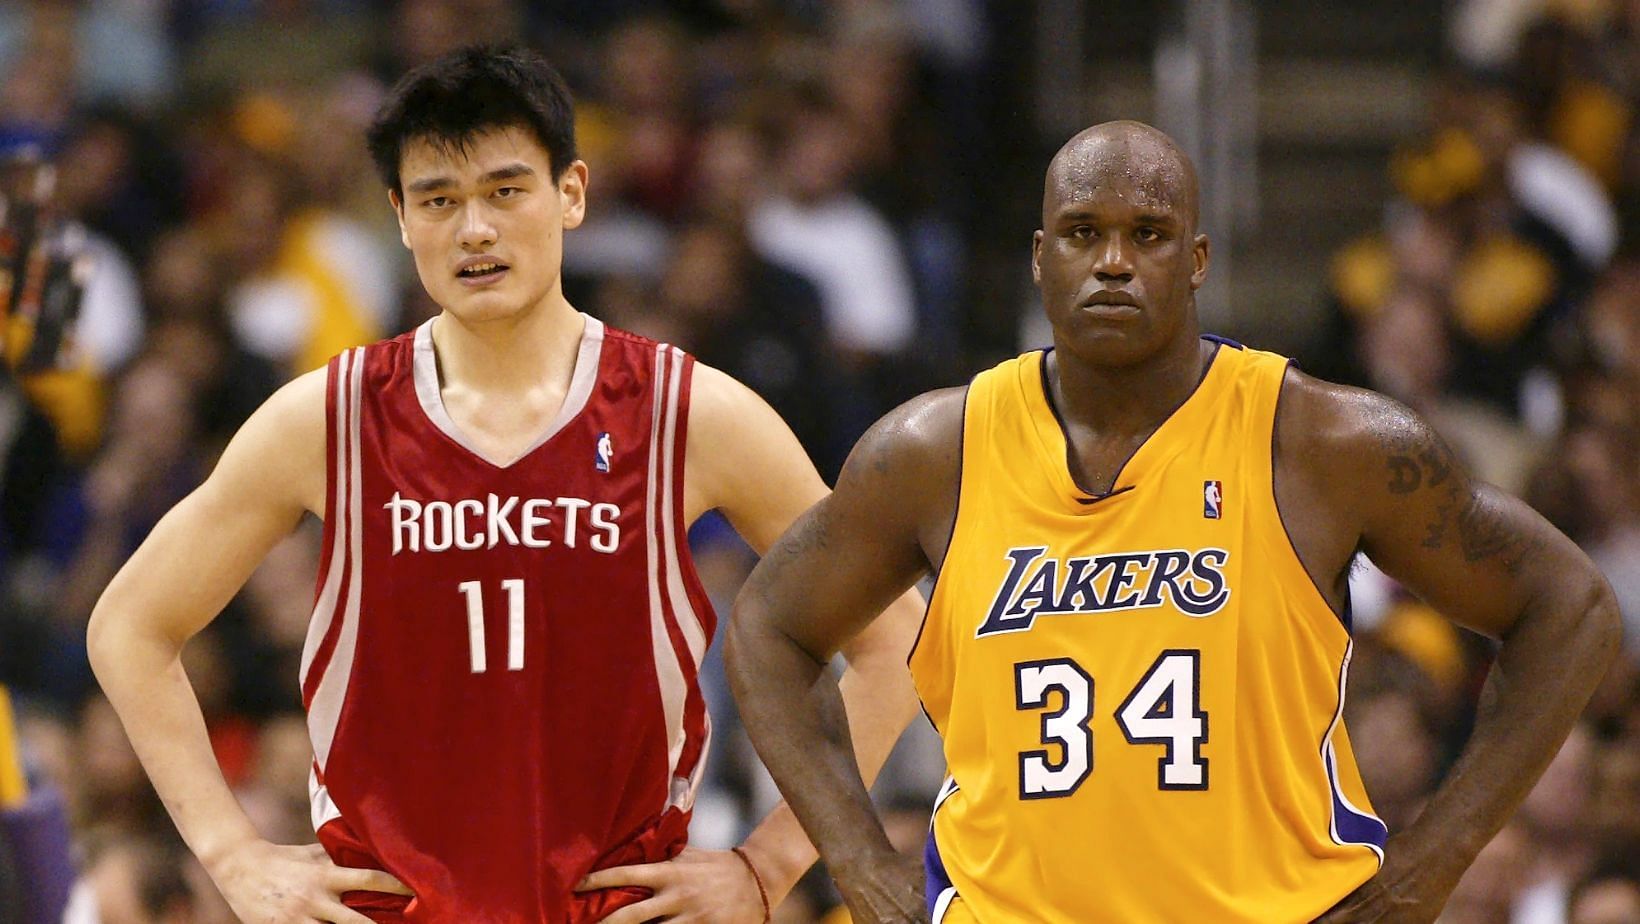 Is NBA Legend Yao Ming actually 7-foot-6? Finding out more